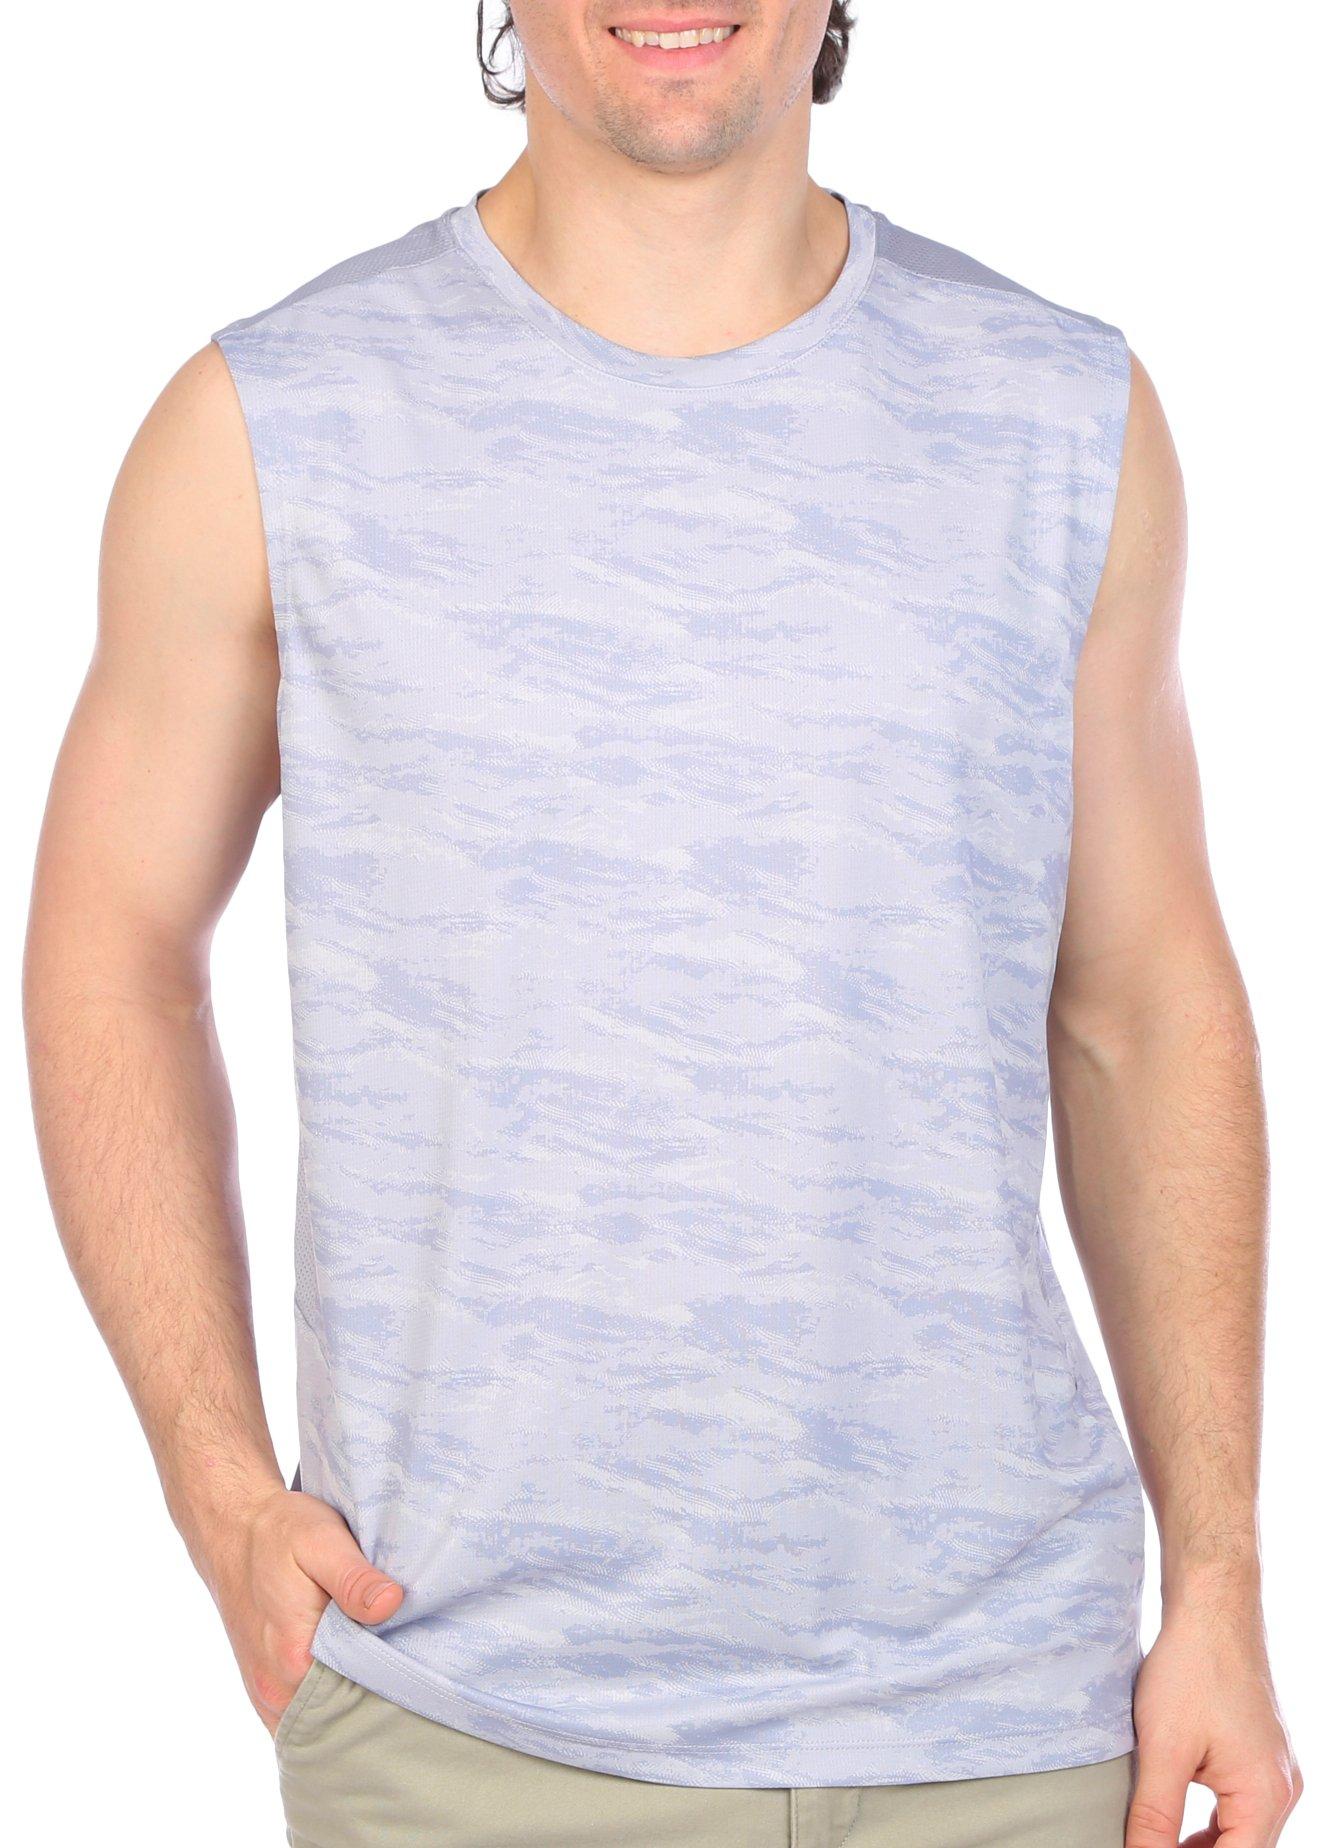 Mens Performance Camo Vented Mesh  Muscle Top